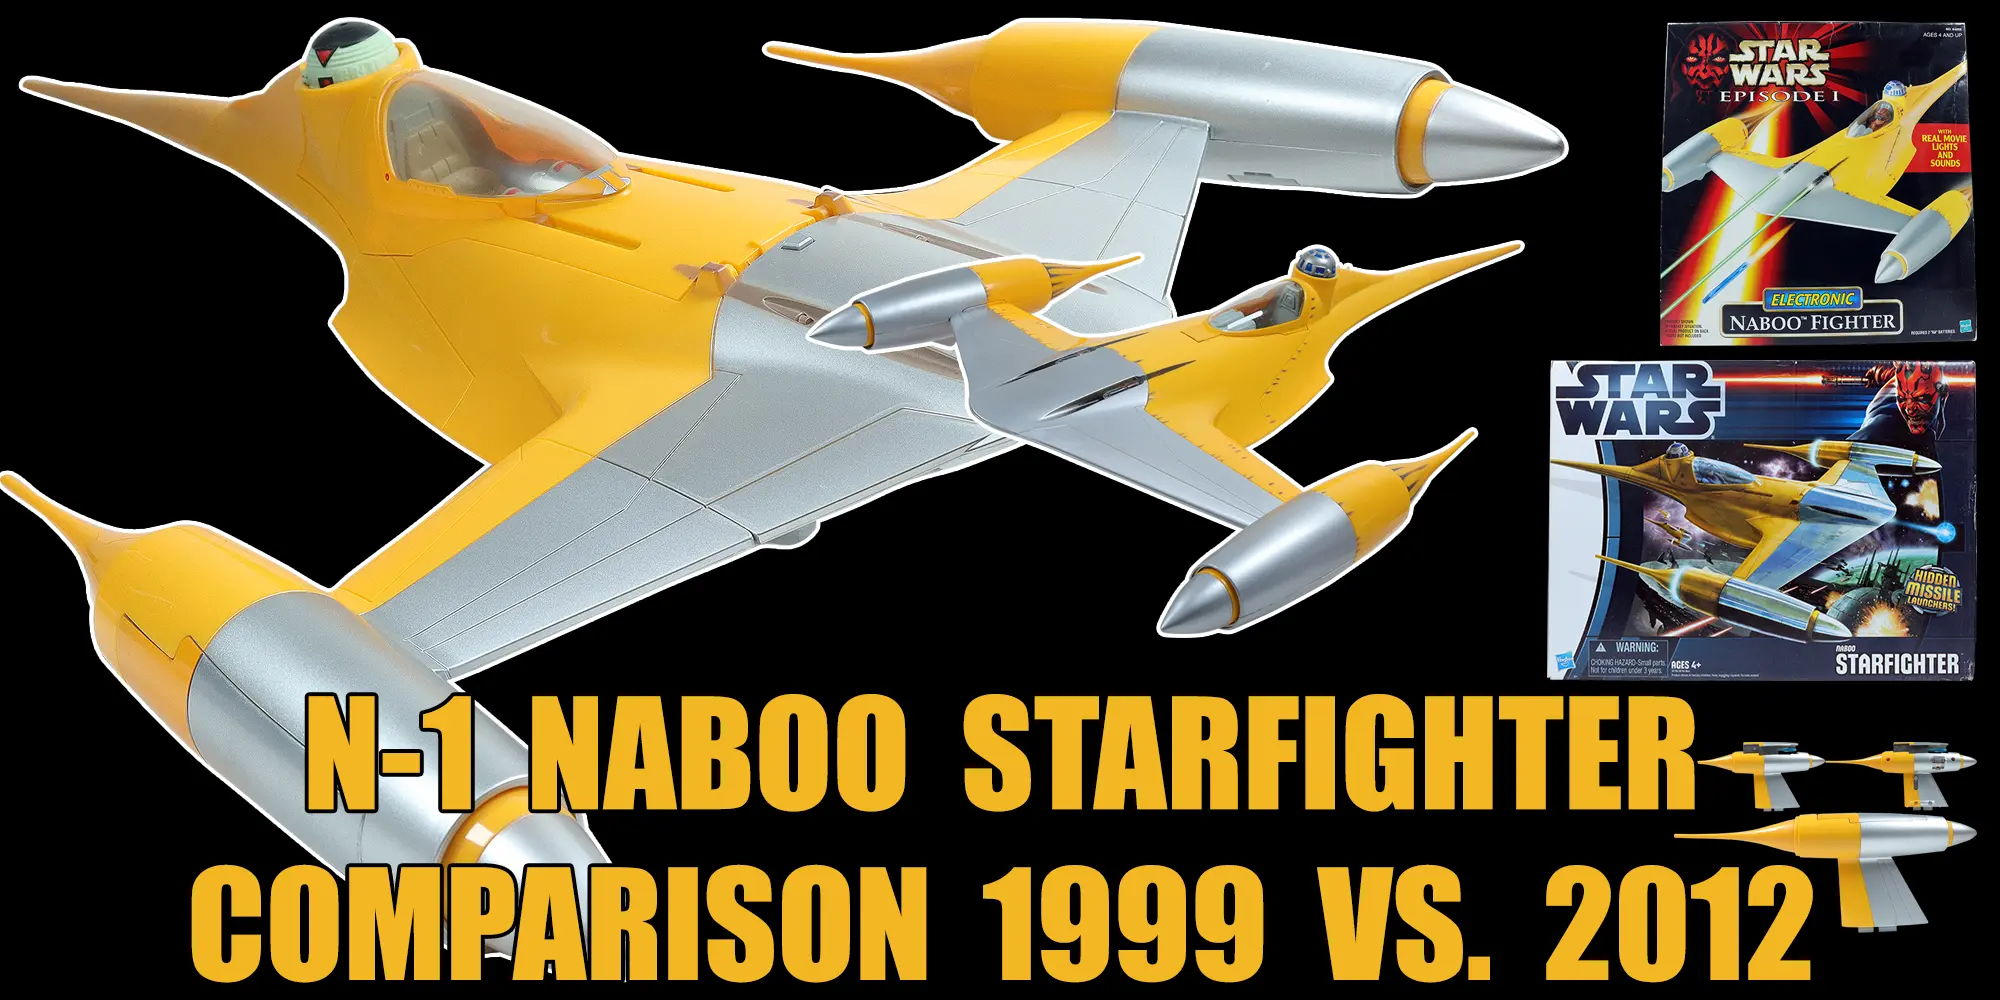 N-1 Naboo Starfighter Comparison - Take A Look!